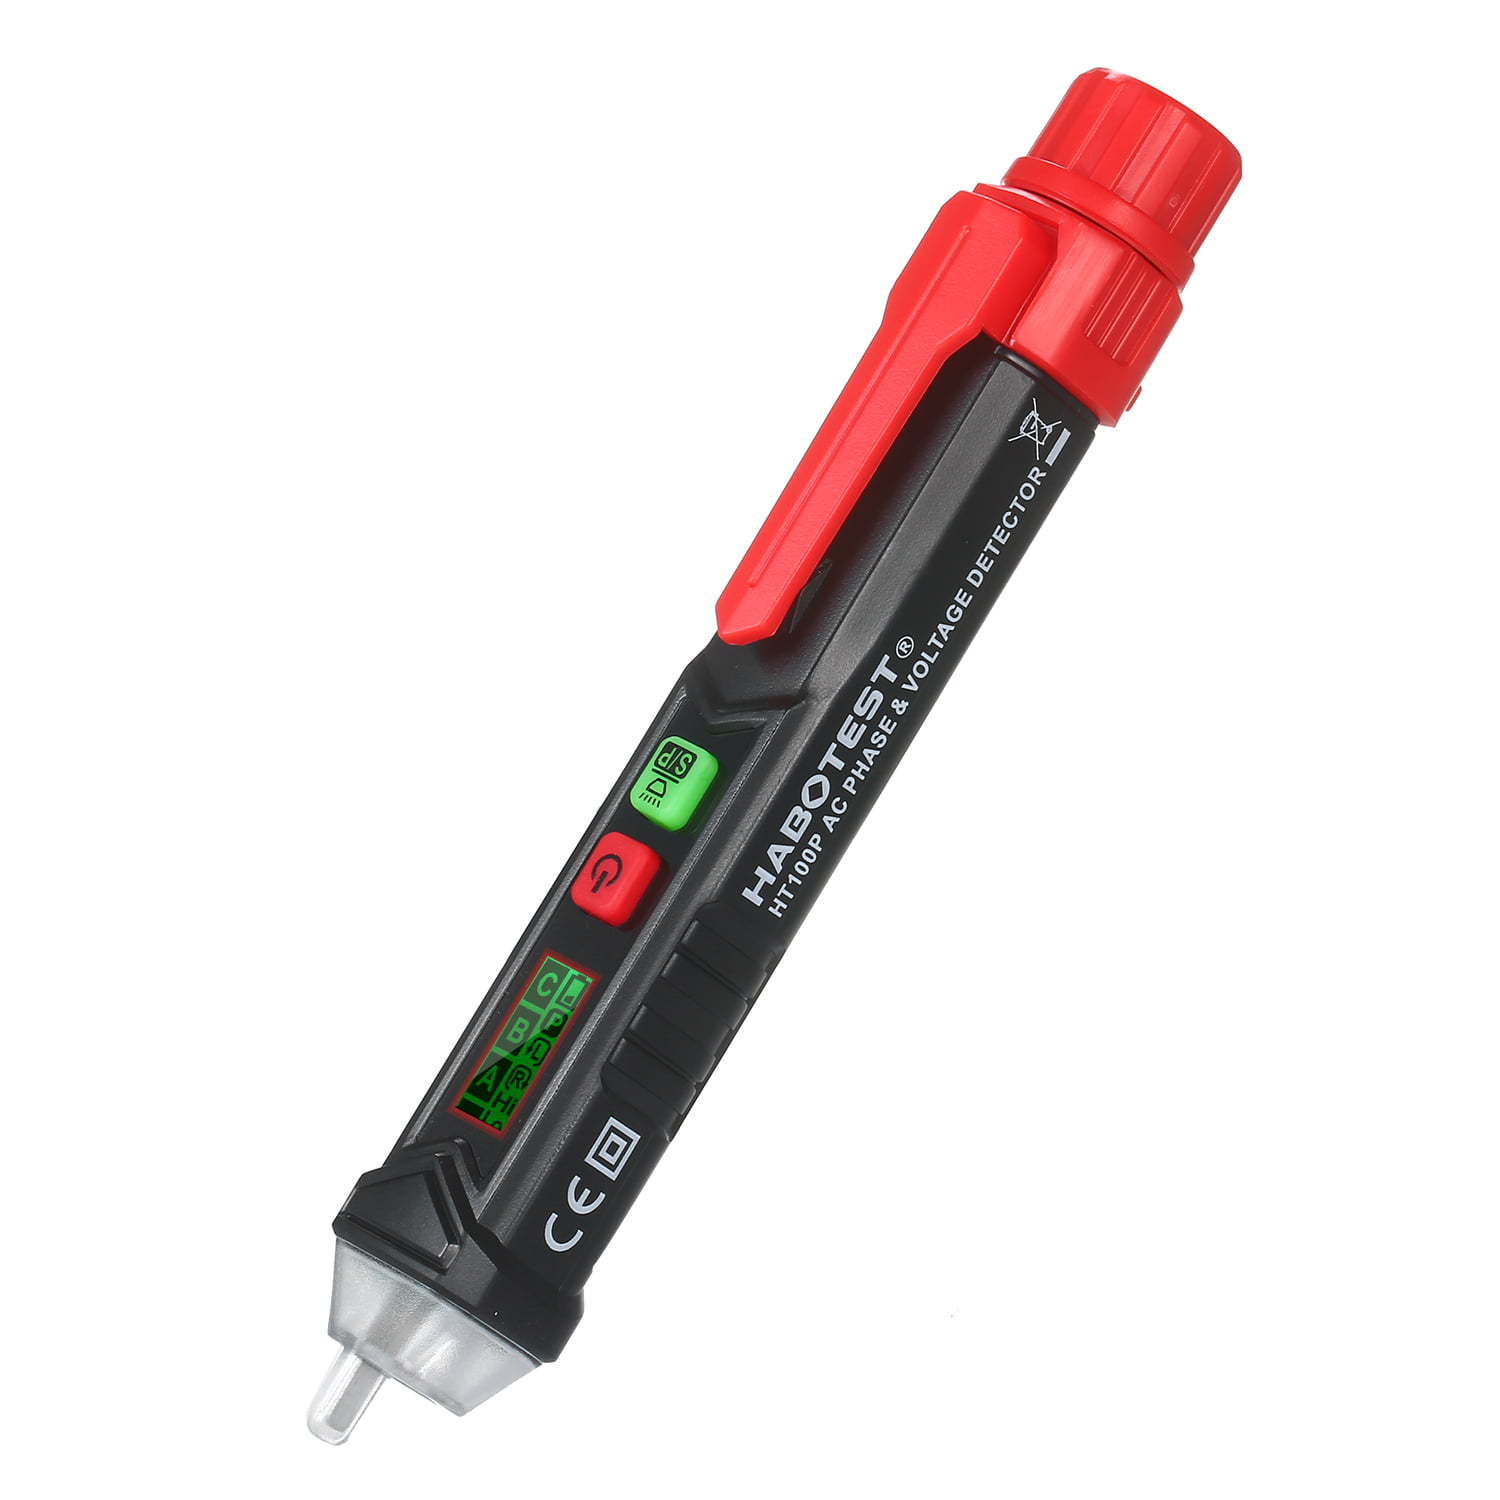 1PC Responsive Electrical Tester Pen,Non Contact Voltage Tester Pen,Waterproof Induced Electric Tester Pen,Bright Led Light Waterproof Dc/ac Voltage Tester Pen,Electric Voltage Tester Non-Contact